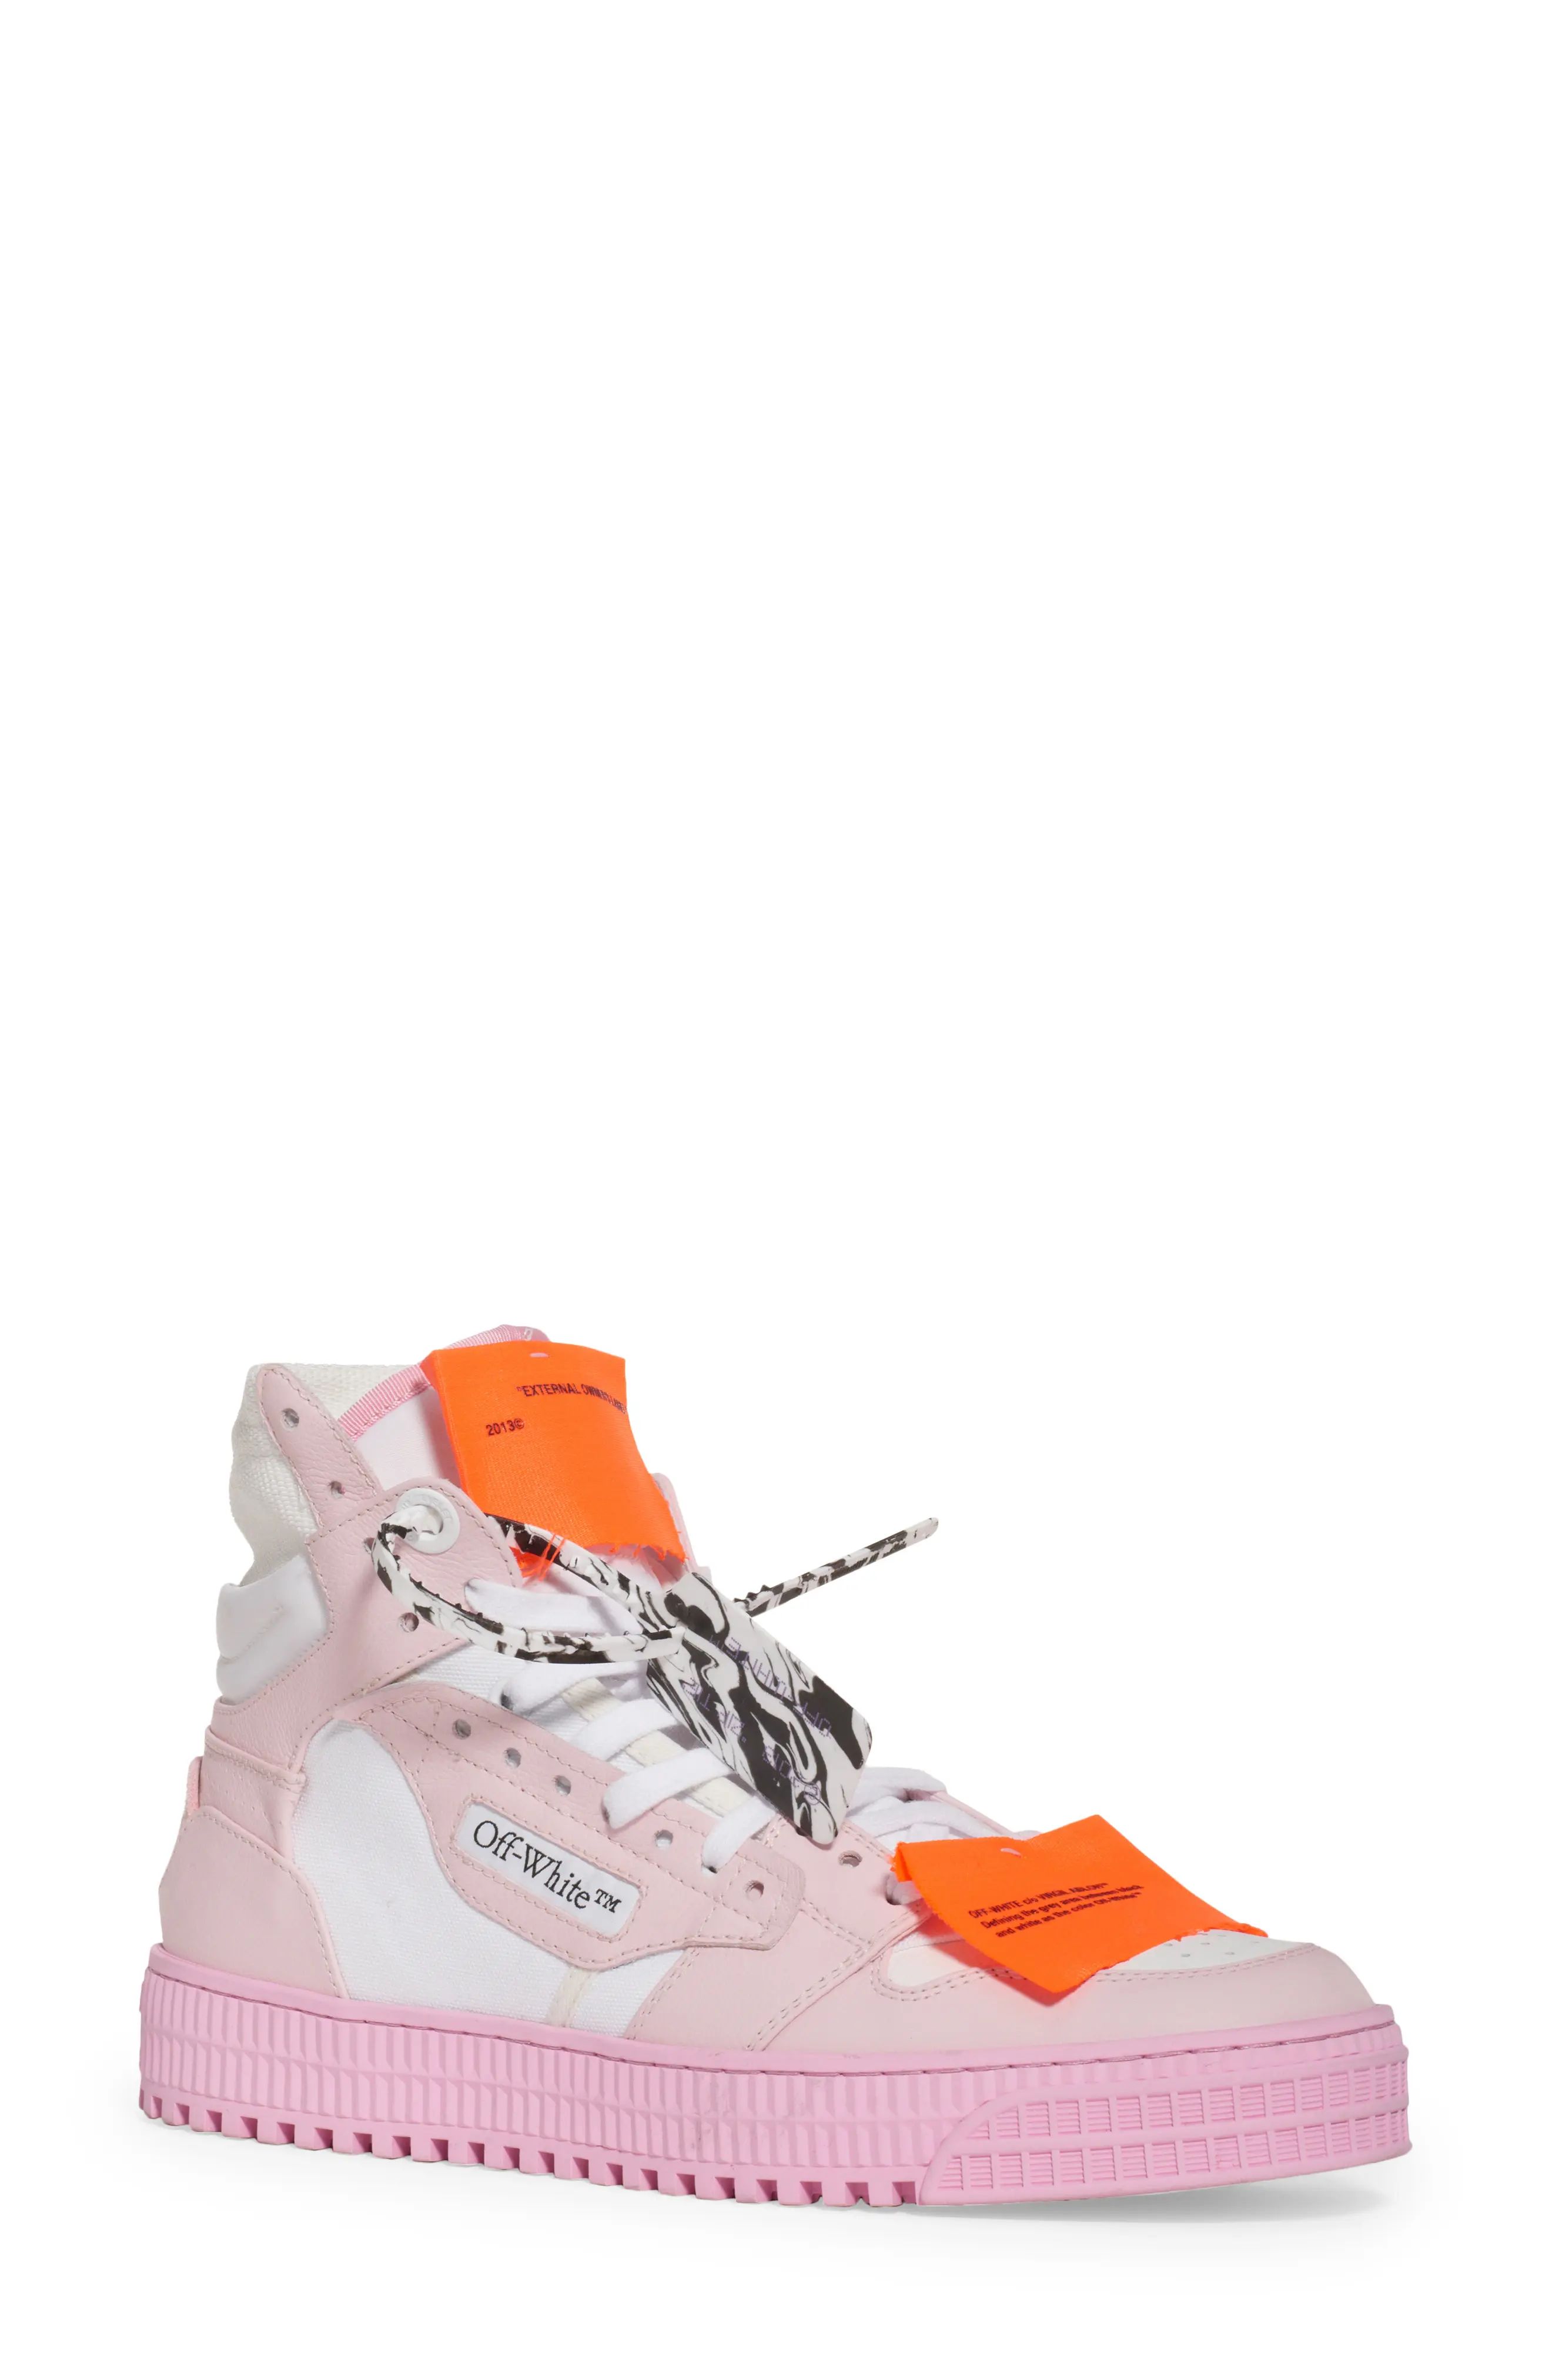 Off-White Off Court 3.0 High Top Sneaker in White/Pink at Nordstrom, Size 11Us | Nordstrom